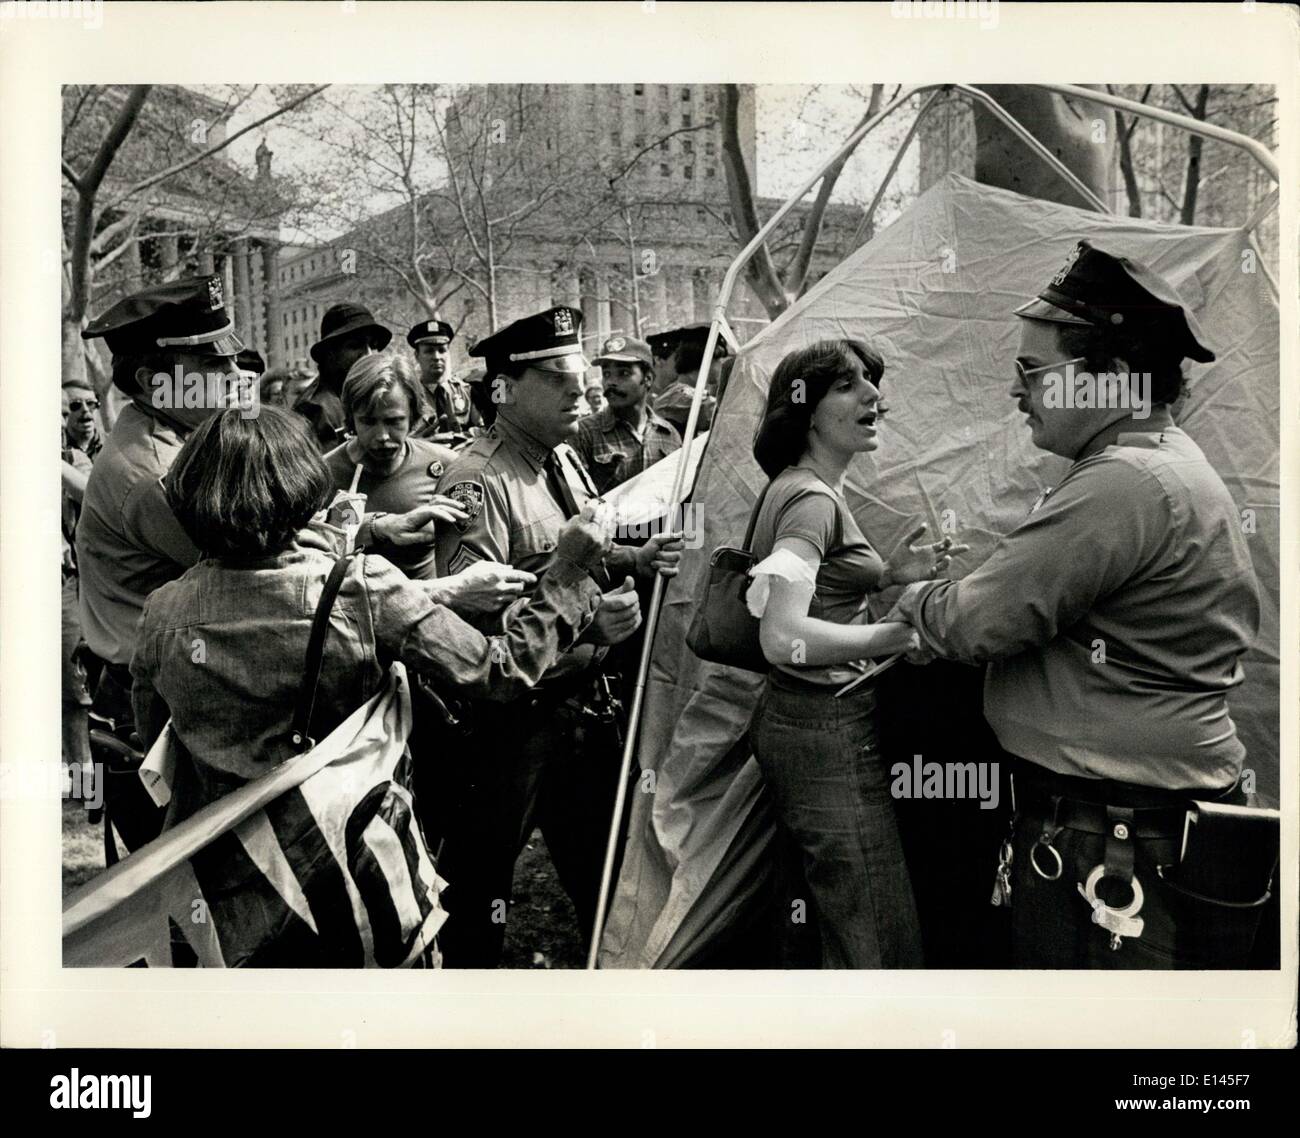 Apr. 04, 2012 - Cops and protesters battle in Foley Sq. By Brett Alexander and Stephen Gayle: Police and demonstrators exchanged blows with nightsticks and fists today during a protest in Foley Square over cutbacks in federal unemployment benefits. The melee broke out at about 2 p.m. when police started pulling down tents the demonstrators had erected in a park across from the Federal Courthouse. Stock Photo